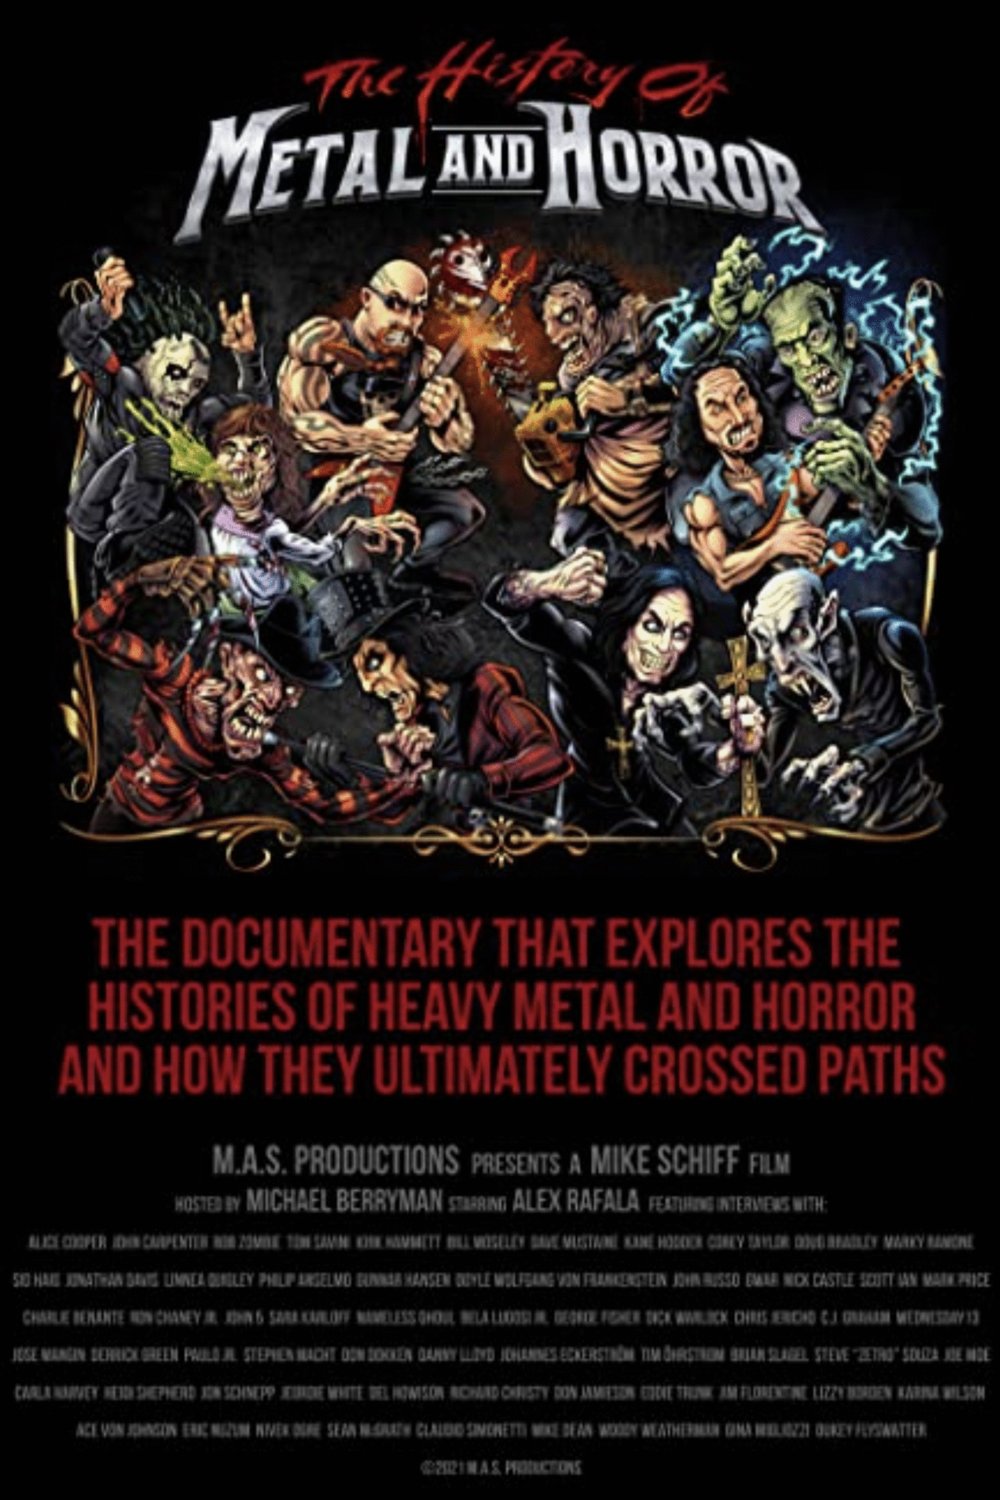 L'affiche du film The History of Metal and Horror